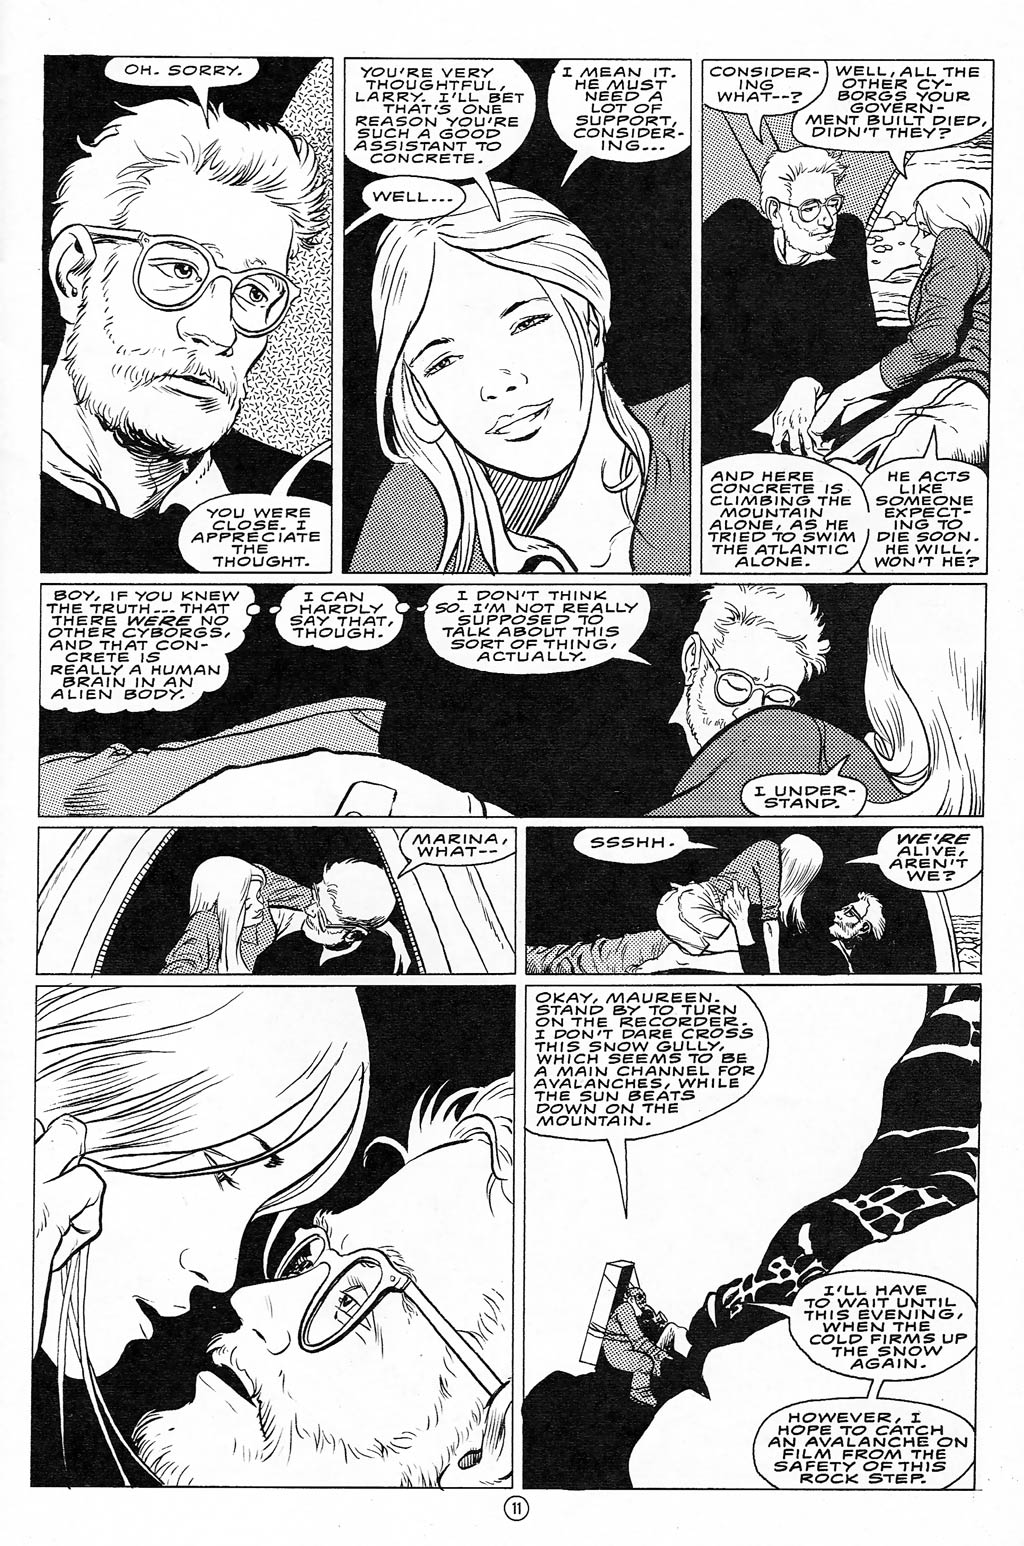 Concrete (1987) issue 9 - Page 13